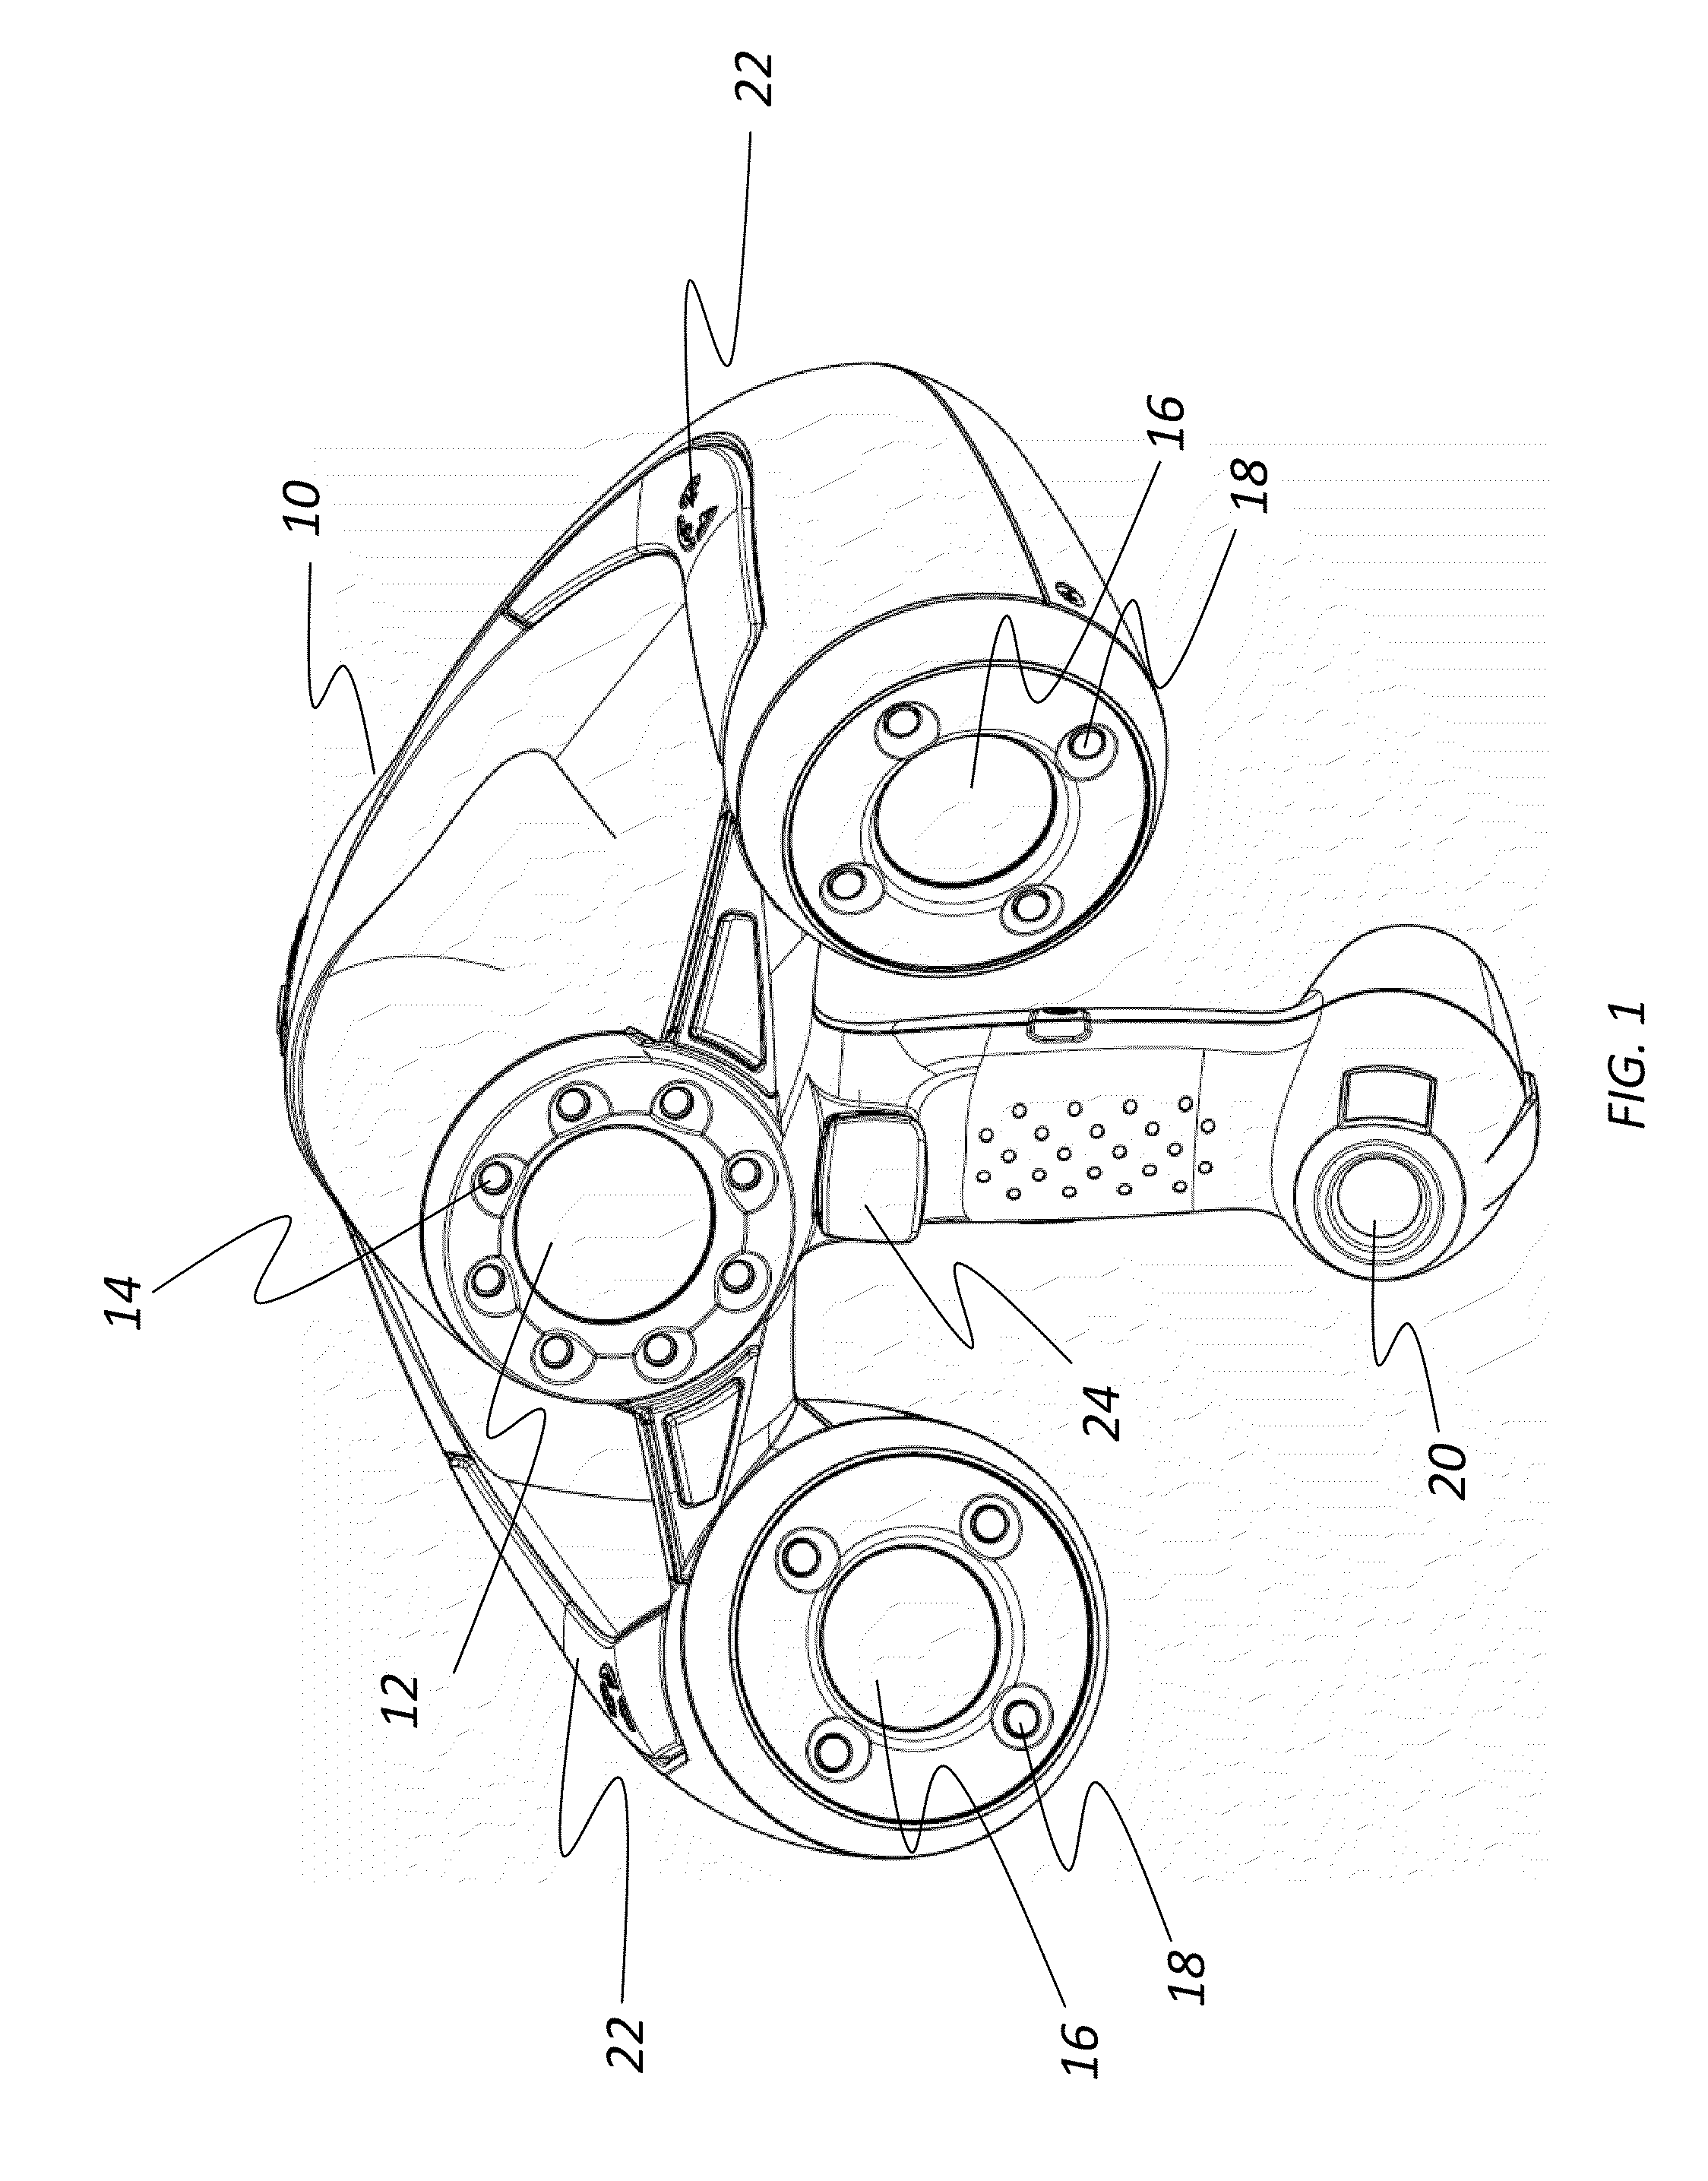 Hand-held self-referenced apparatus for three-dimensional scanning